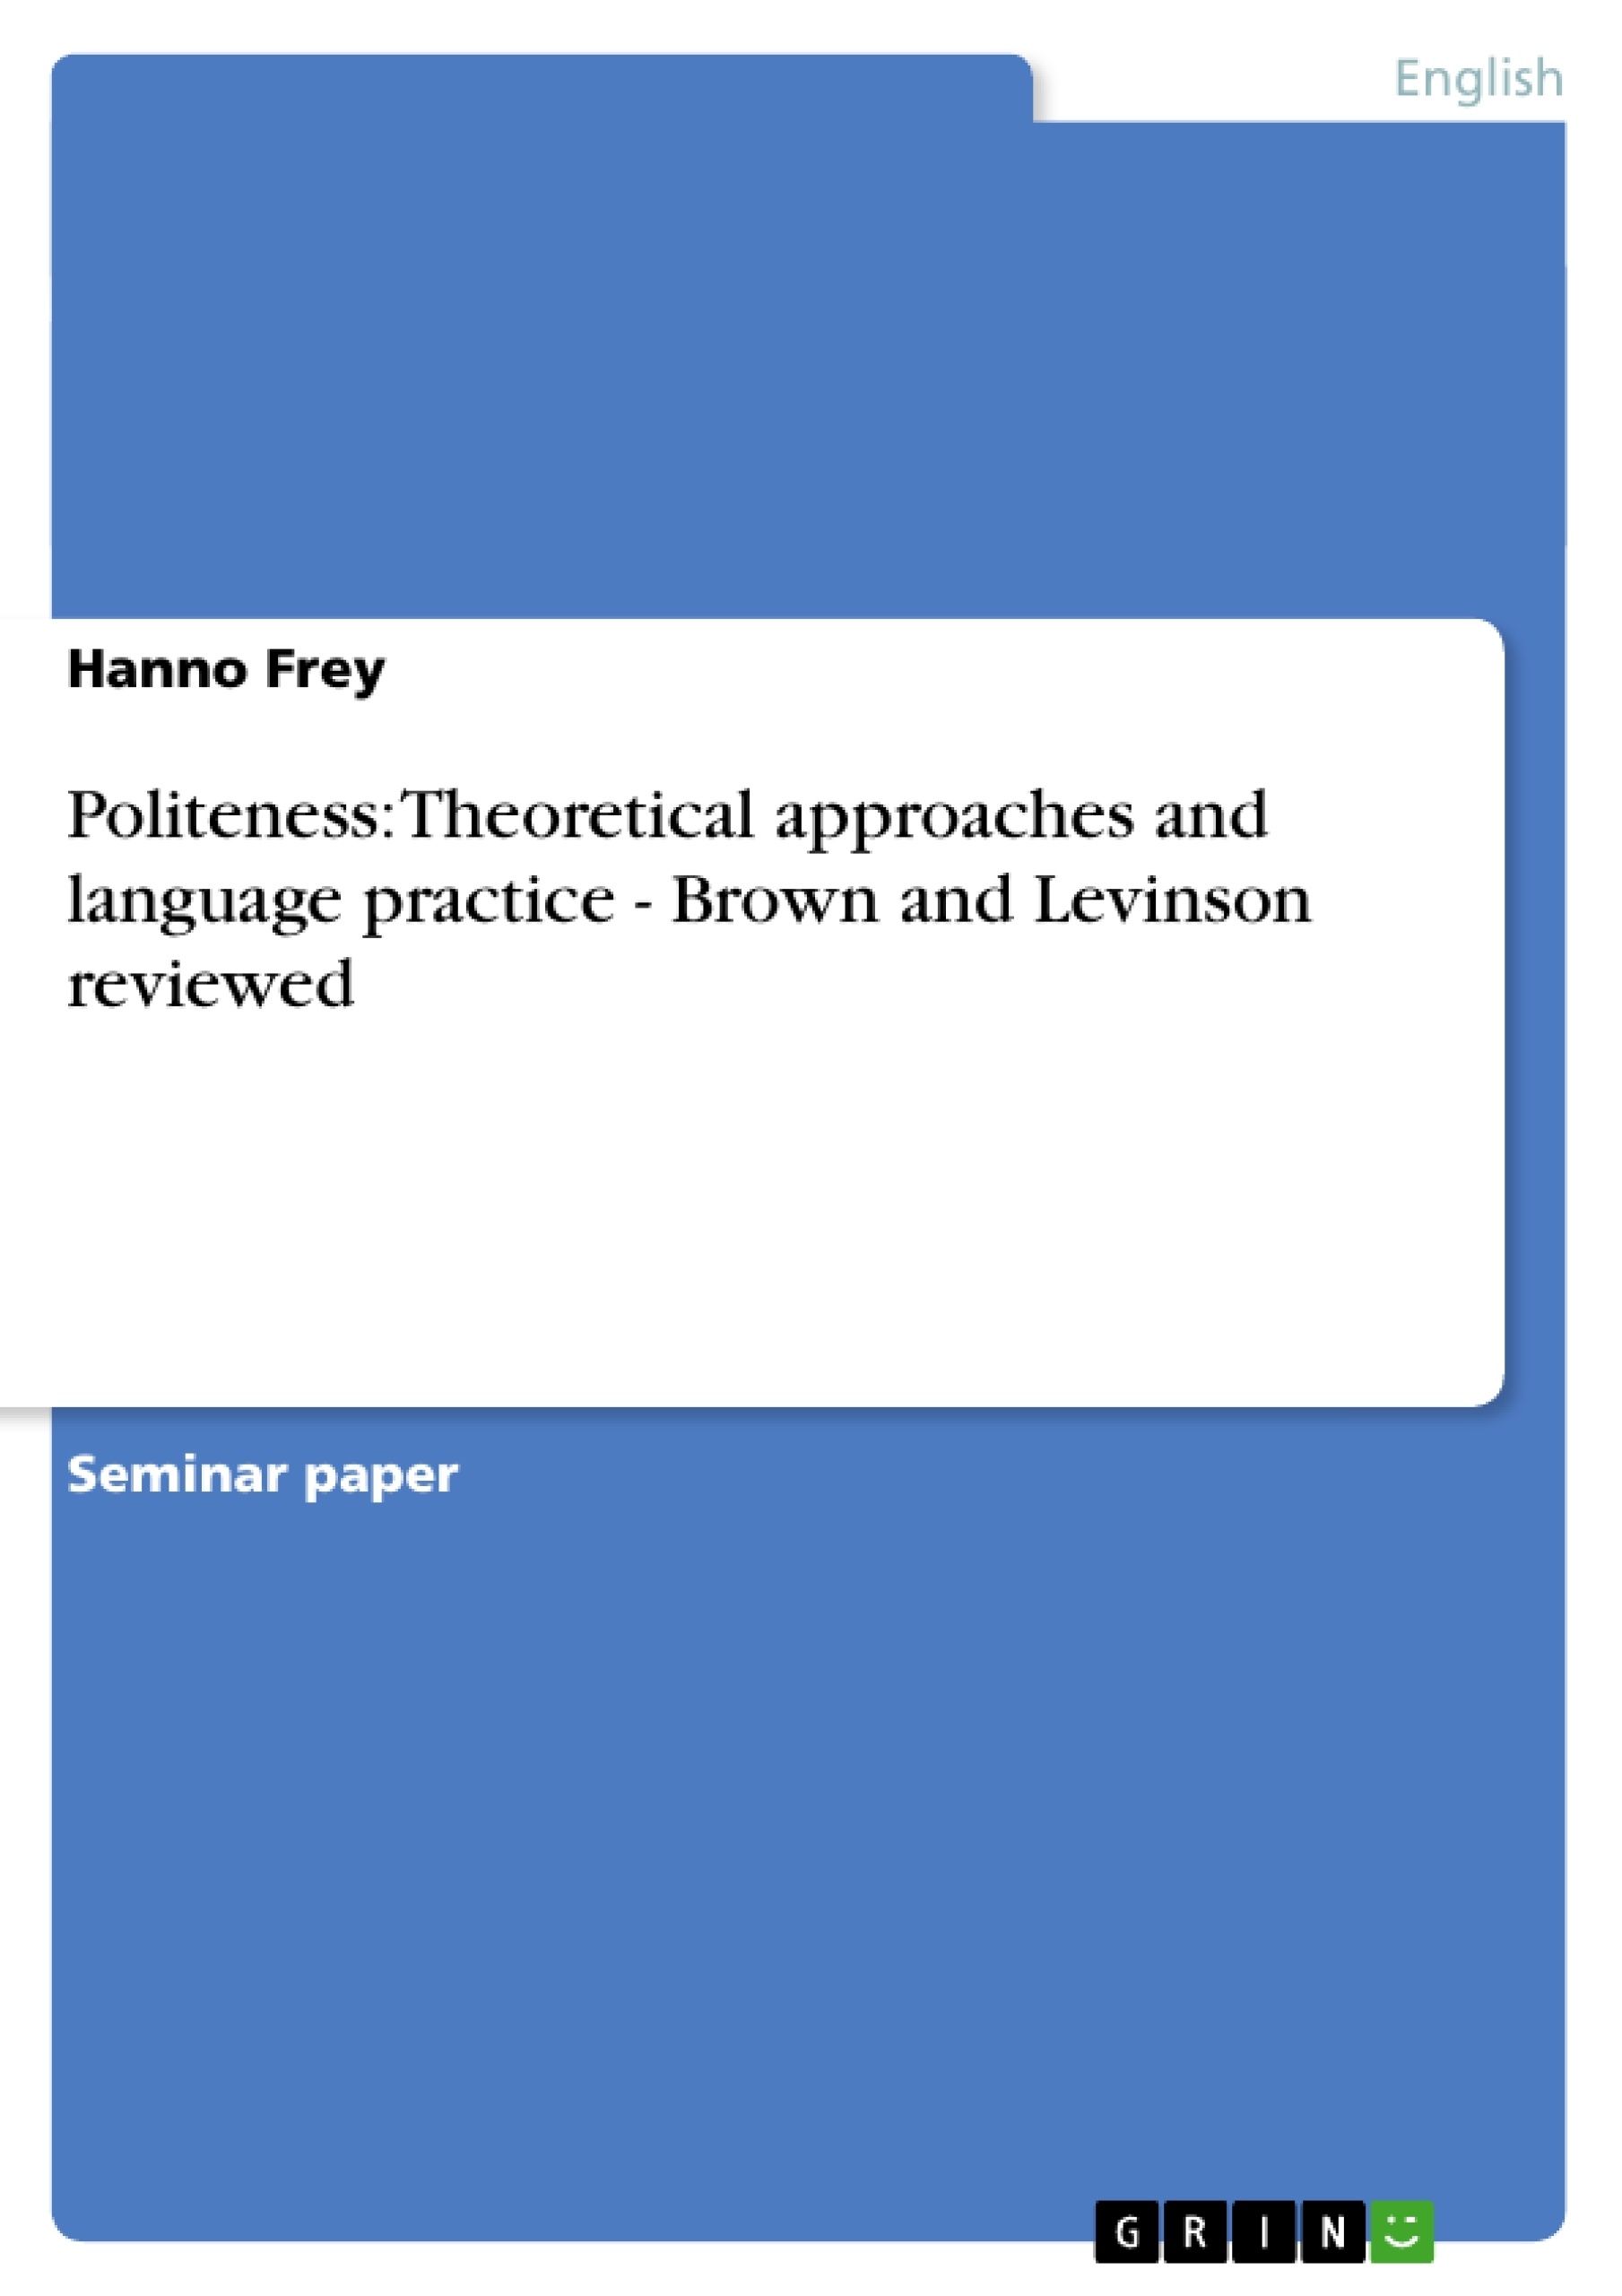 Título: Politeness: Theoretical approaches and language practice - Brown and Levinson reviewed